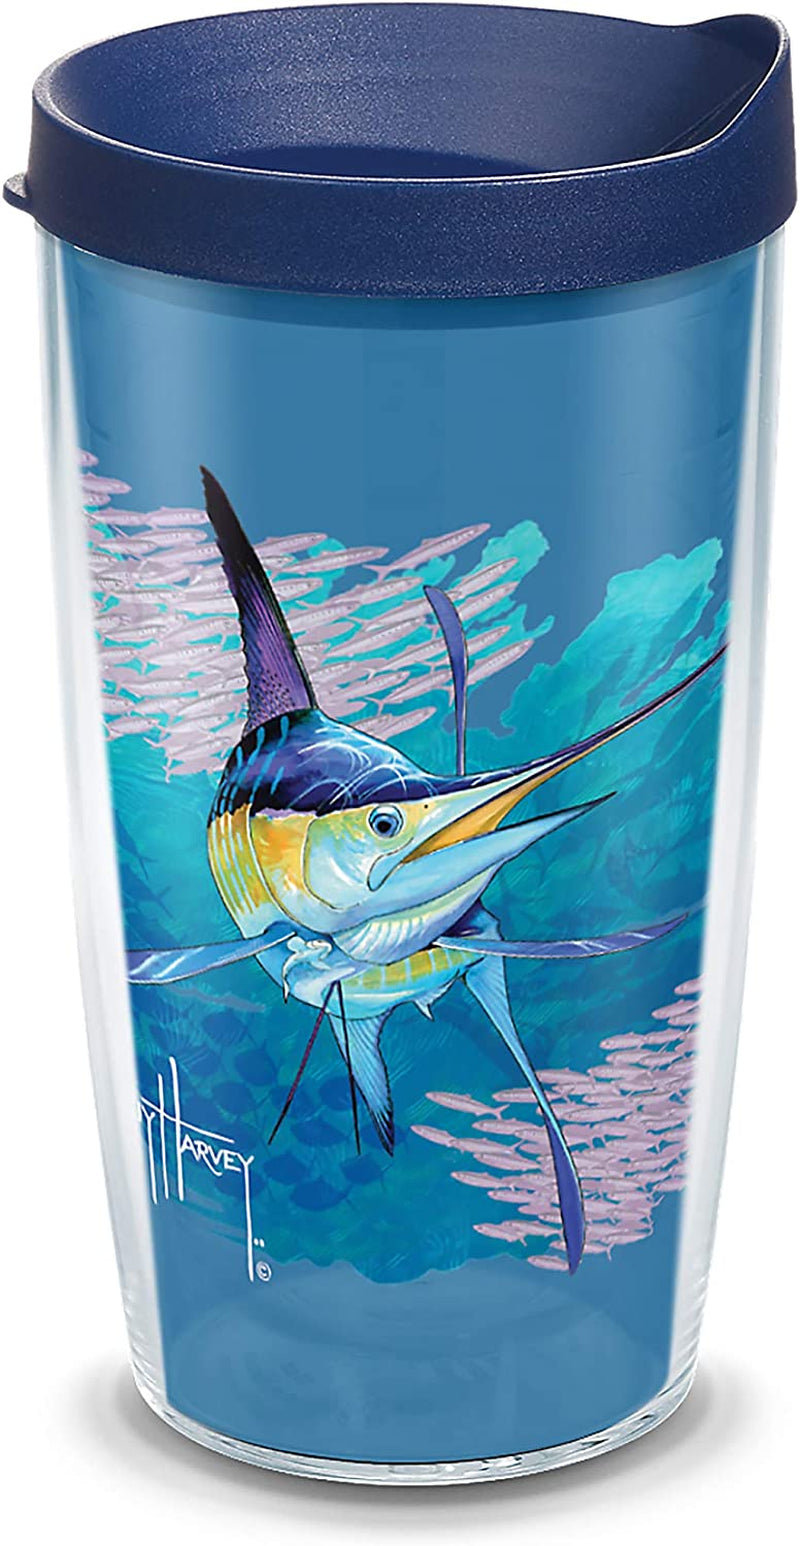 Tervis Made in USA Double Walled Guy Harvey - Offshore Haul Marlin Insulated Tumbler Cup Keeps Drinks Cold & Hot, 16Oz Mug, Classic Home & Garden > Kitchen & Dining > Tableware > Drinkware Tervis Classic 16oz 